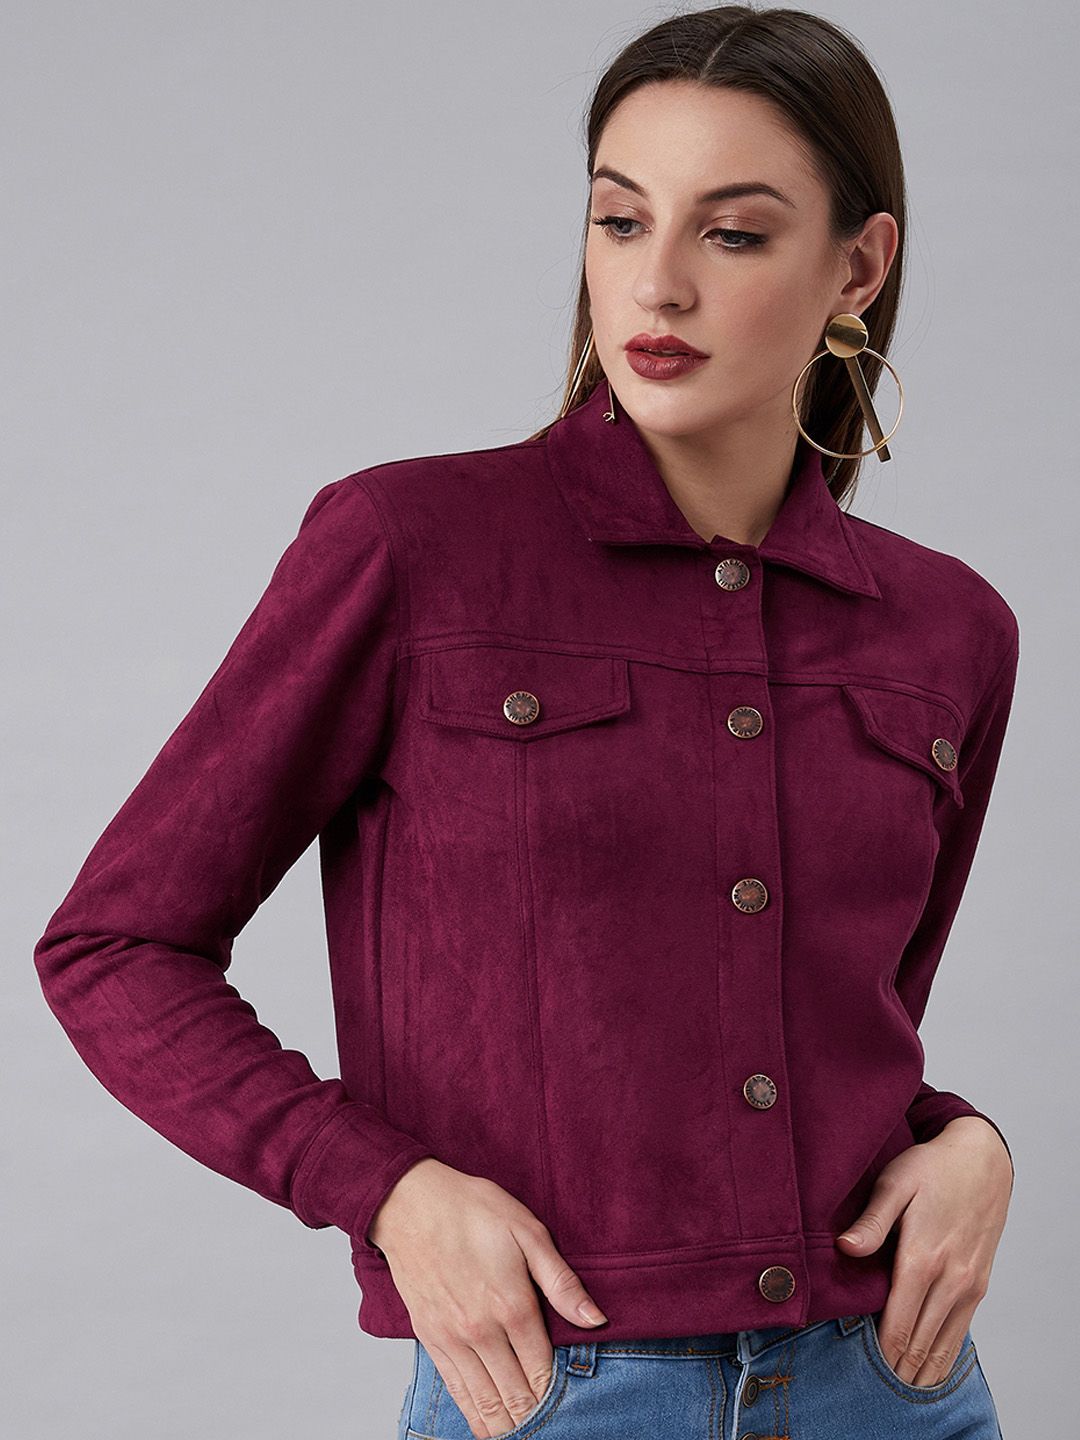 Athena Women Burgundy Solid Tailored Suede Jacket Price in India